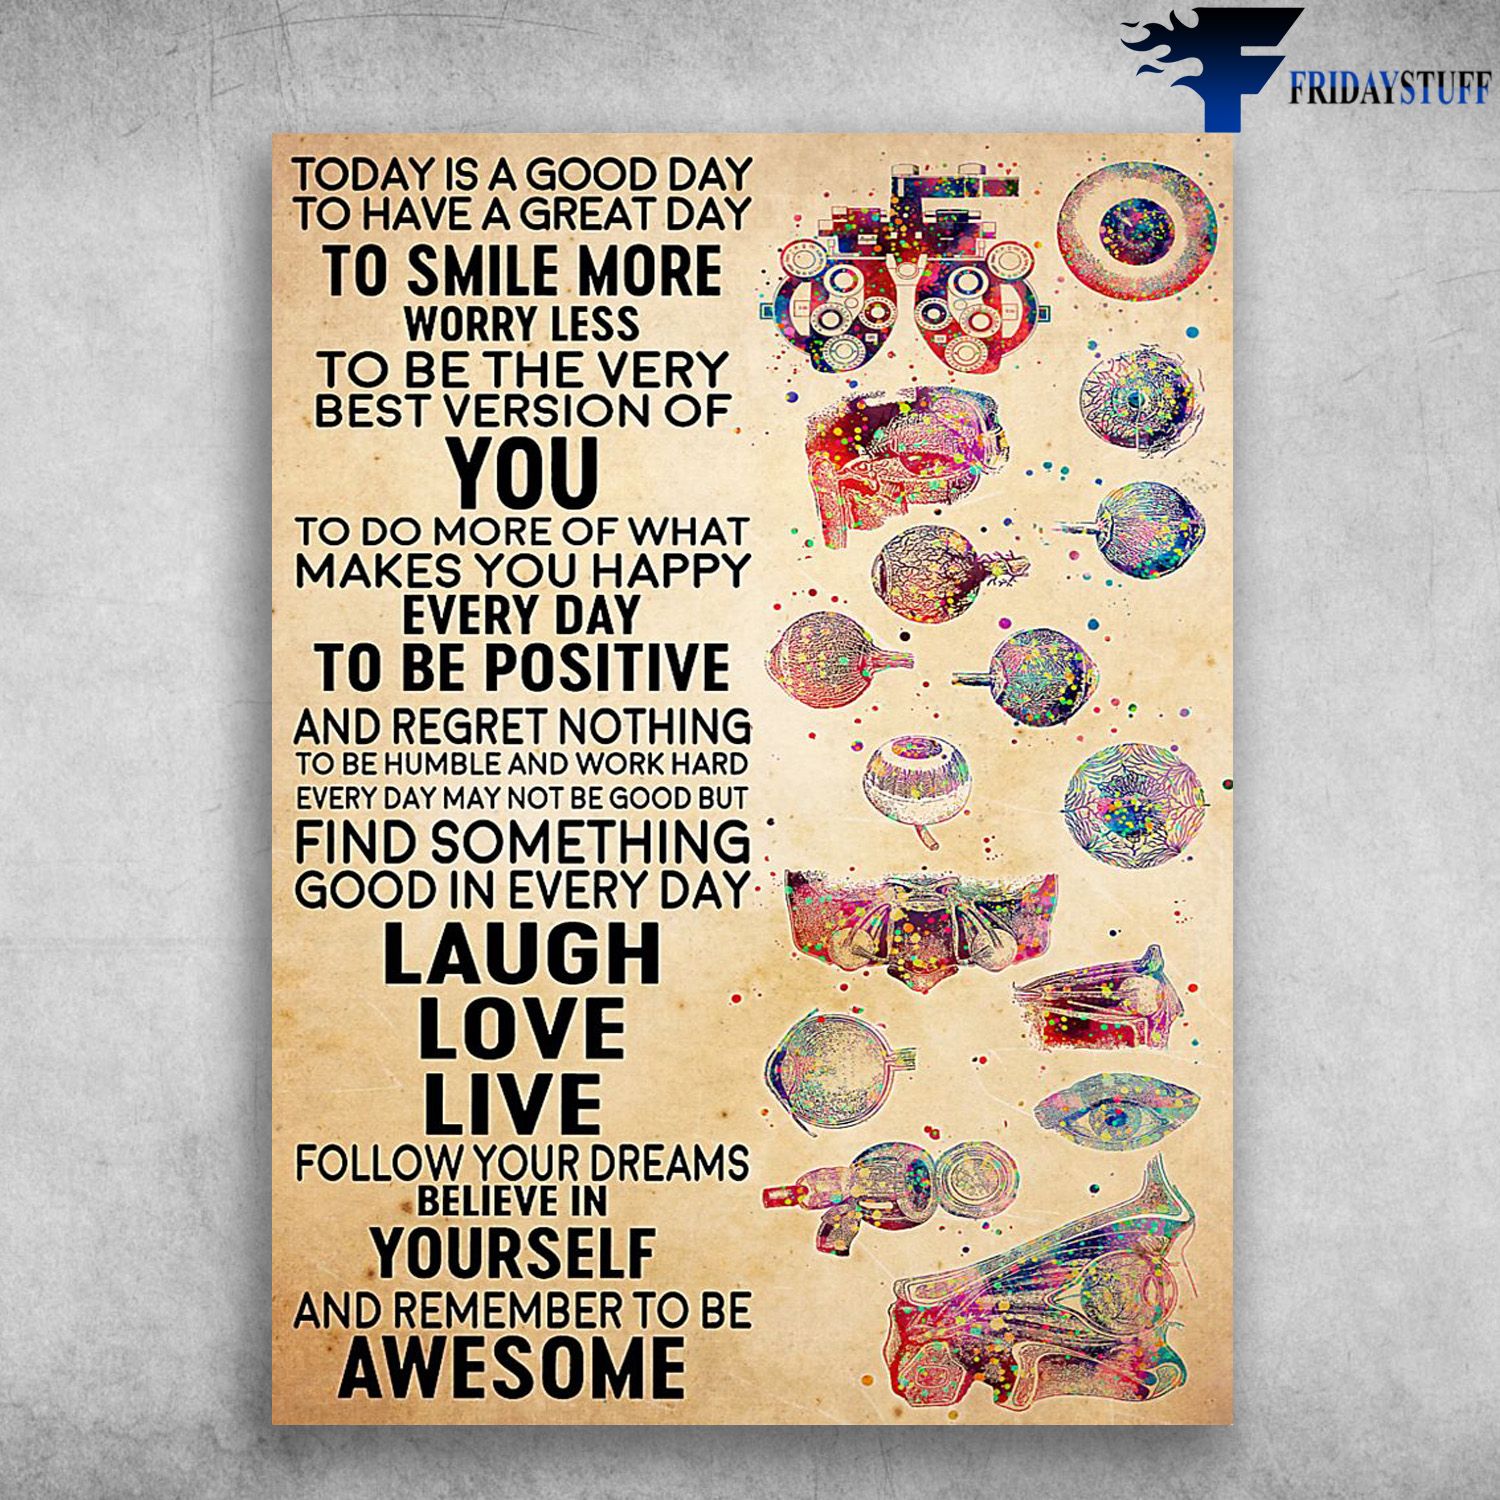 Eyeball Poster, Eyes Take Care - Today Is A Good Day To Have A Great ay, To Smile More Worry Less, To Be The Very Best Version Of You, To Do More Of What Makes You Happy Every Day